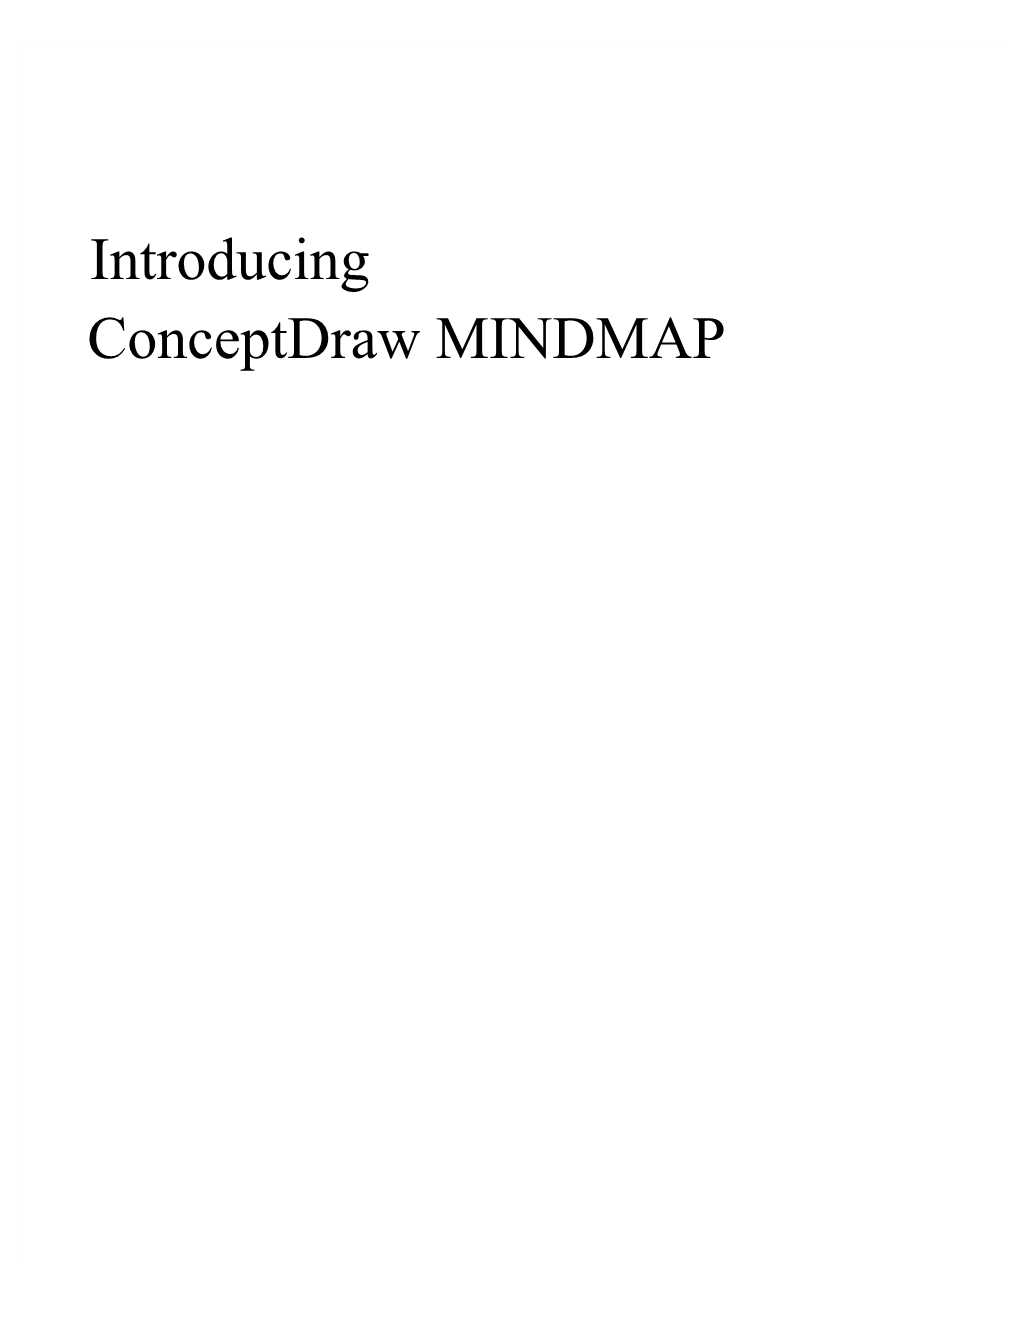 Introducing Conceptdraw MINDMAP Contents